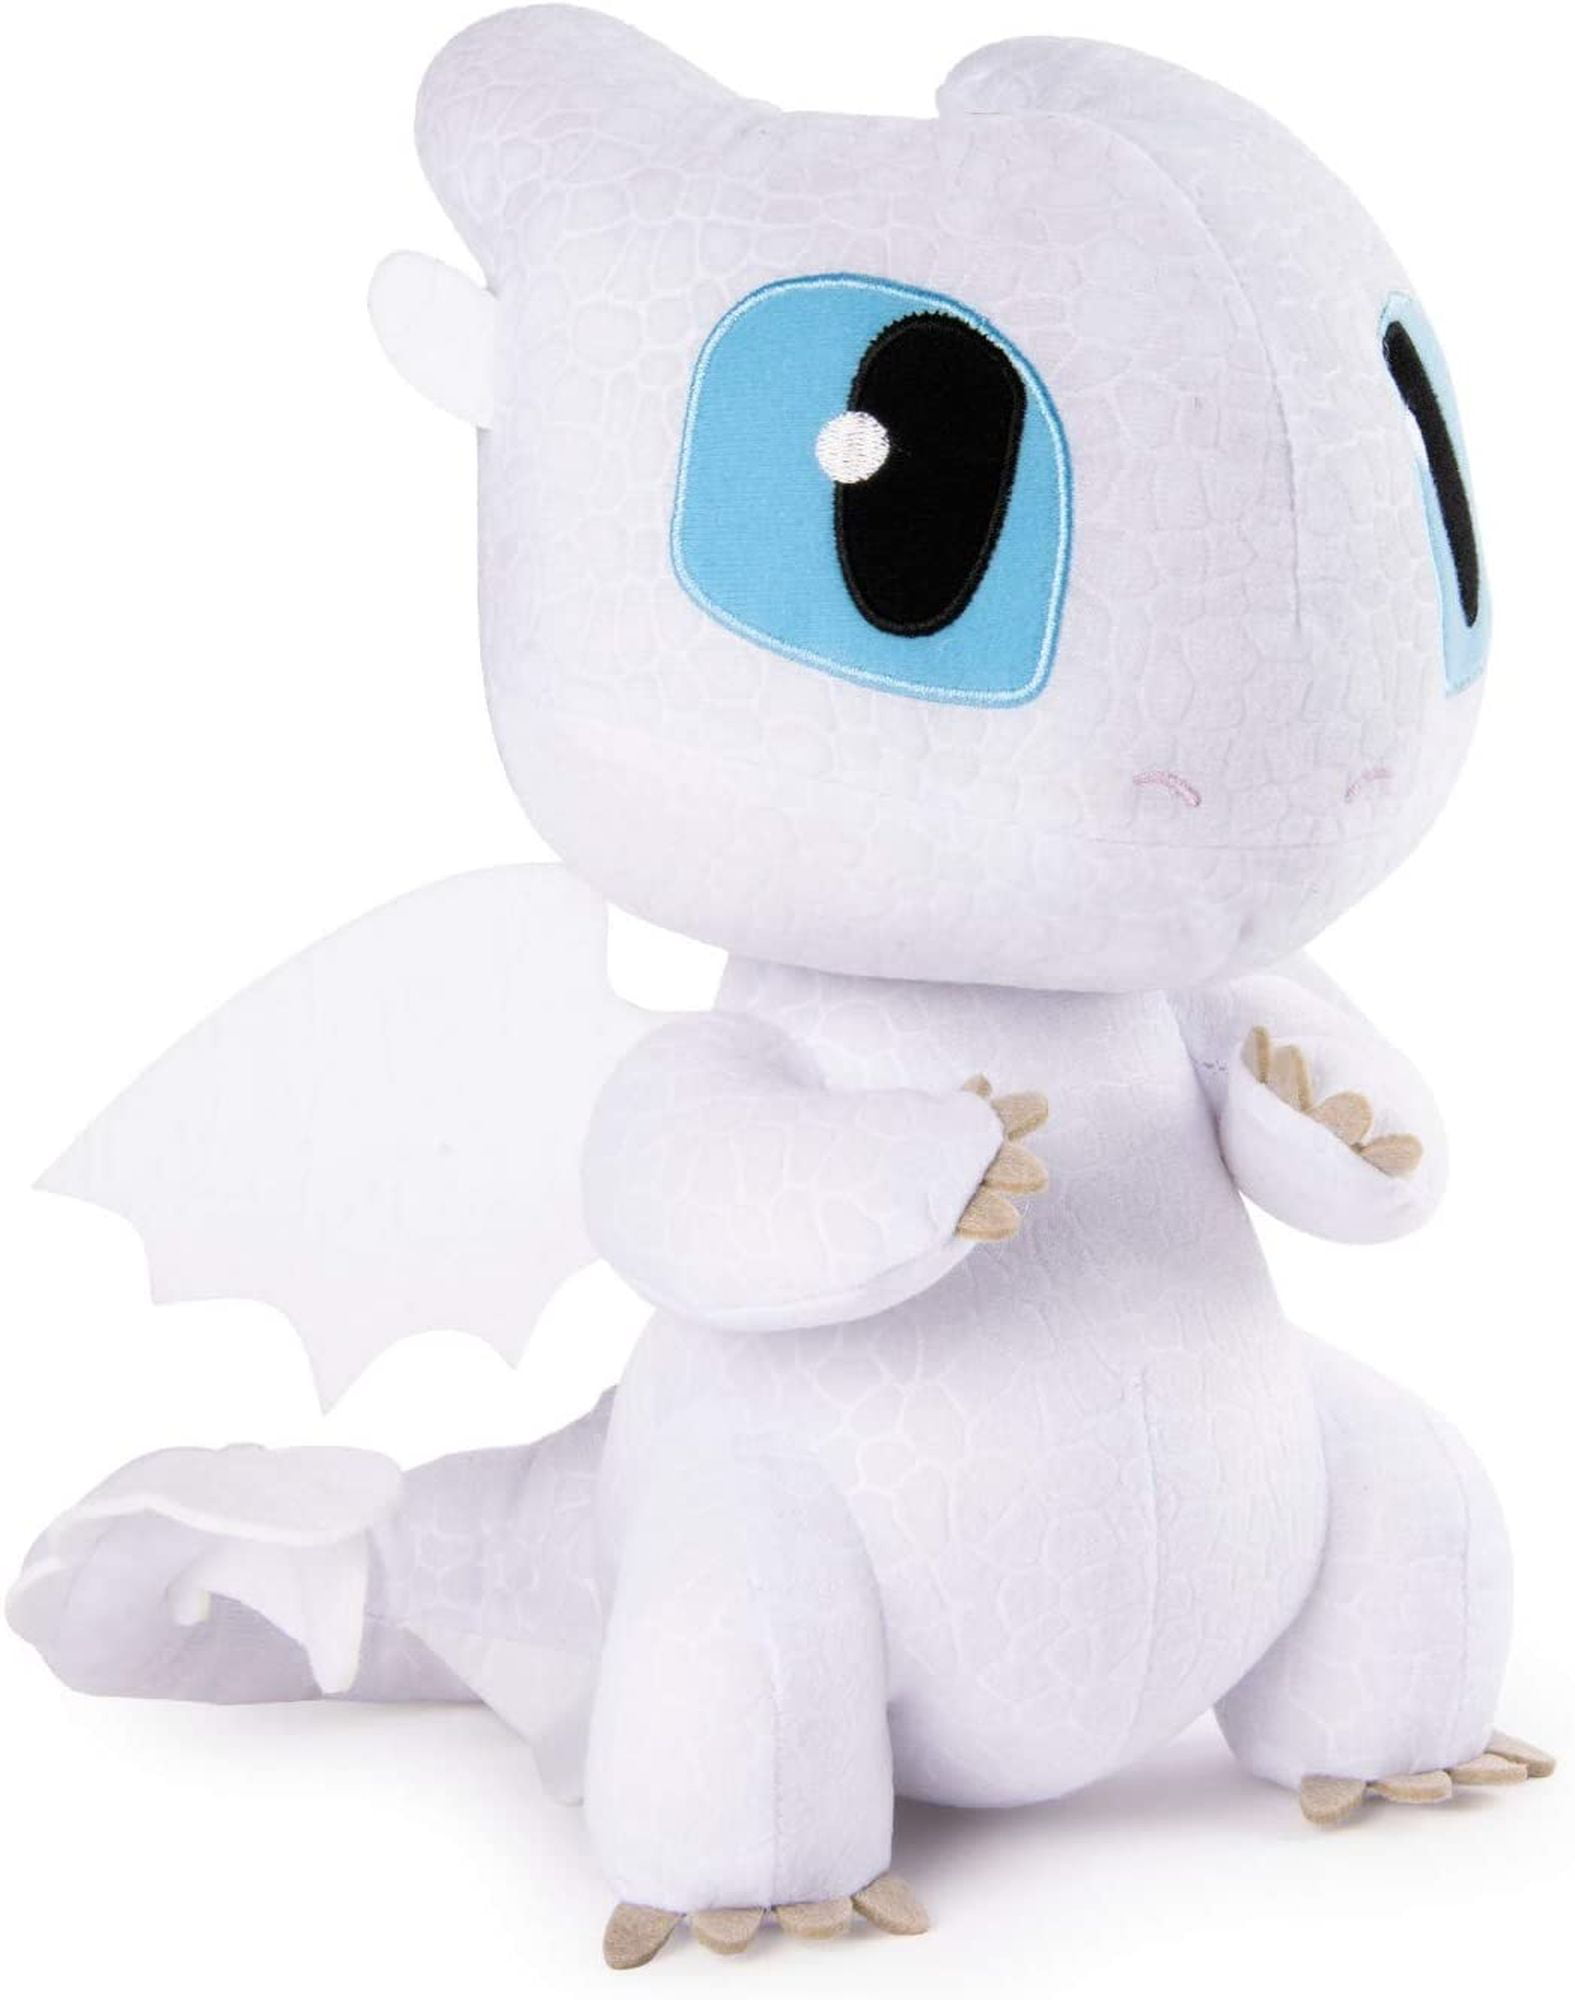 Details about   1SET LIGHT FURY How to Train Your Dragon 3 DreamWorks Movie Doll Plush Toys Gift 